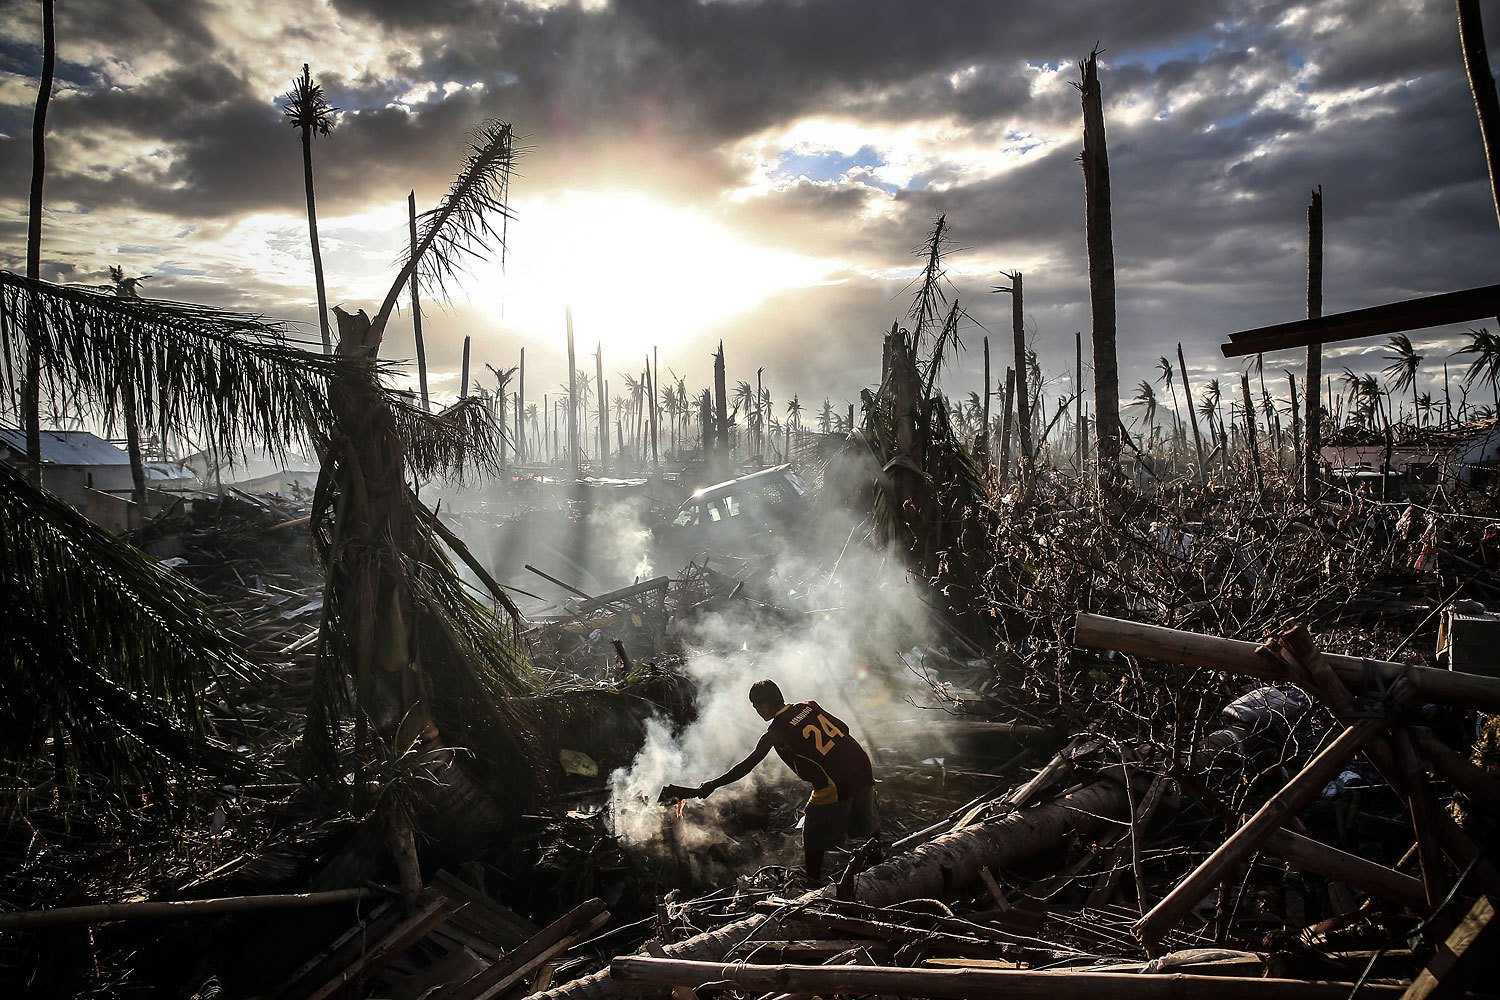 A man fans flames on a fire in Tanauan, Leyte province, Philippines, on November 19, 2013. Typhoon Haiyan devastated the nation leaving at least 6,000 dead.